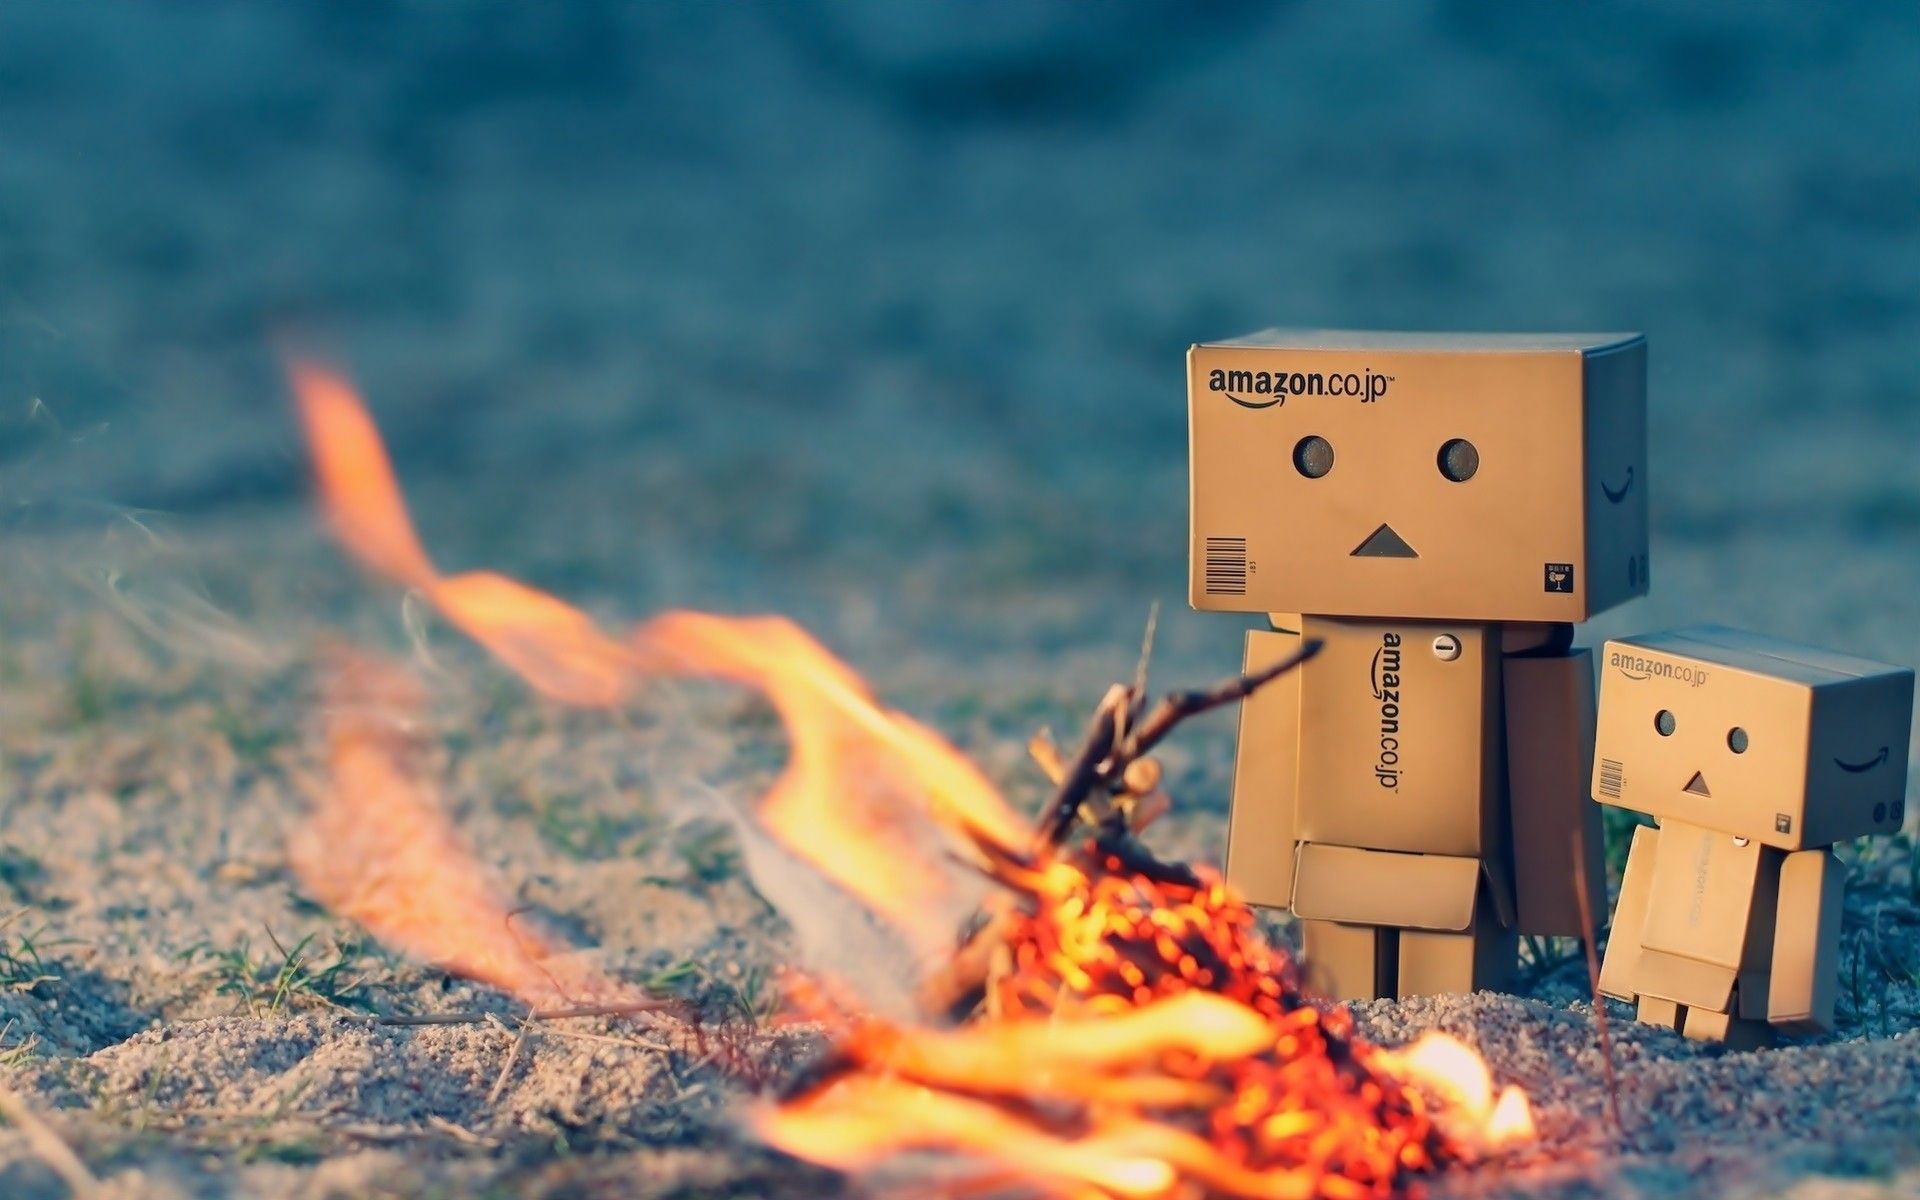 Amazon: Danbo, A technology company formerly known as Cadabra, Inc. 1920x1200 HD Wallpaper.